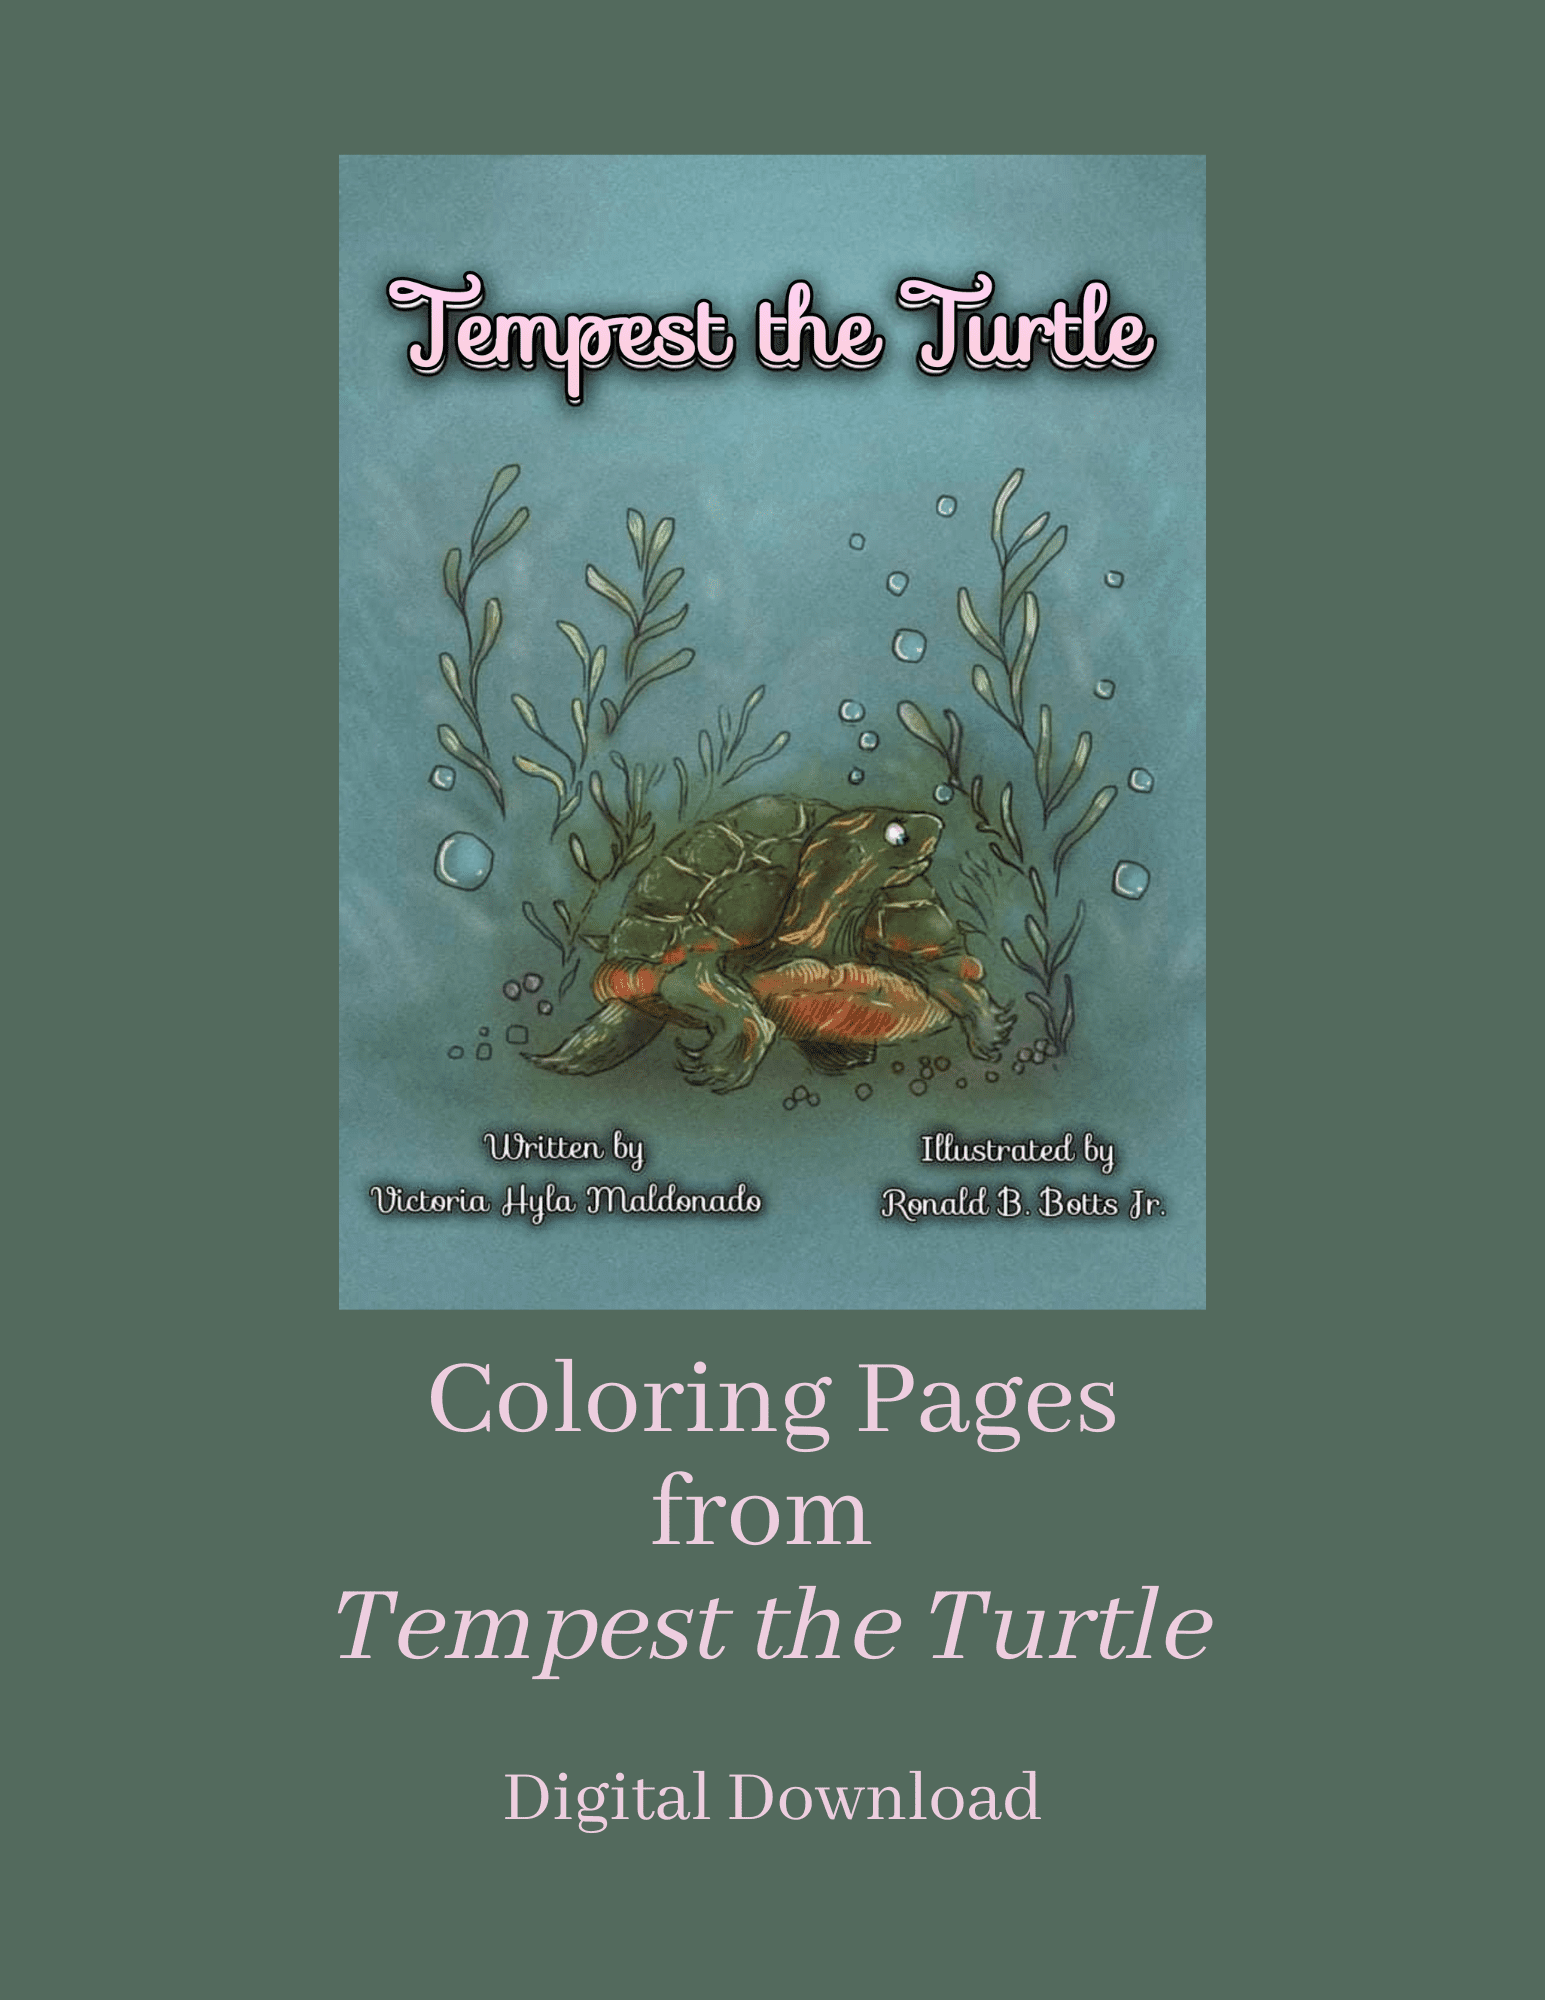 This Tempest the Turtle Coloring Pages (Digital Download) is made with love by Victoria J. Hyla (Author)/Victorious Editing Services! Shop more unique gift ideas today with Spots Initiatives, the best way to support creators.